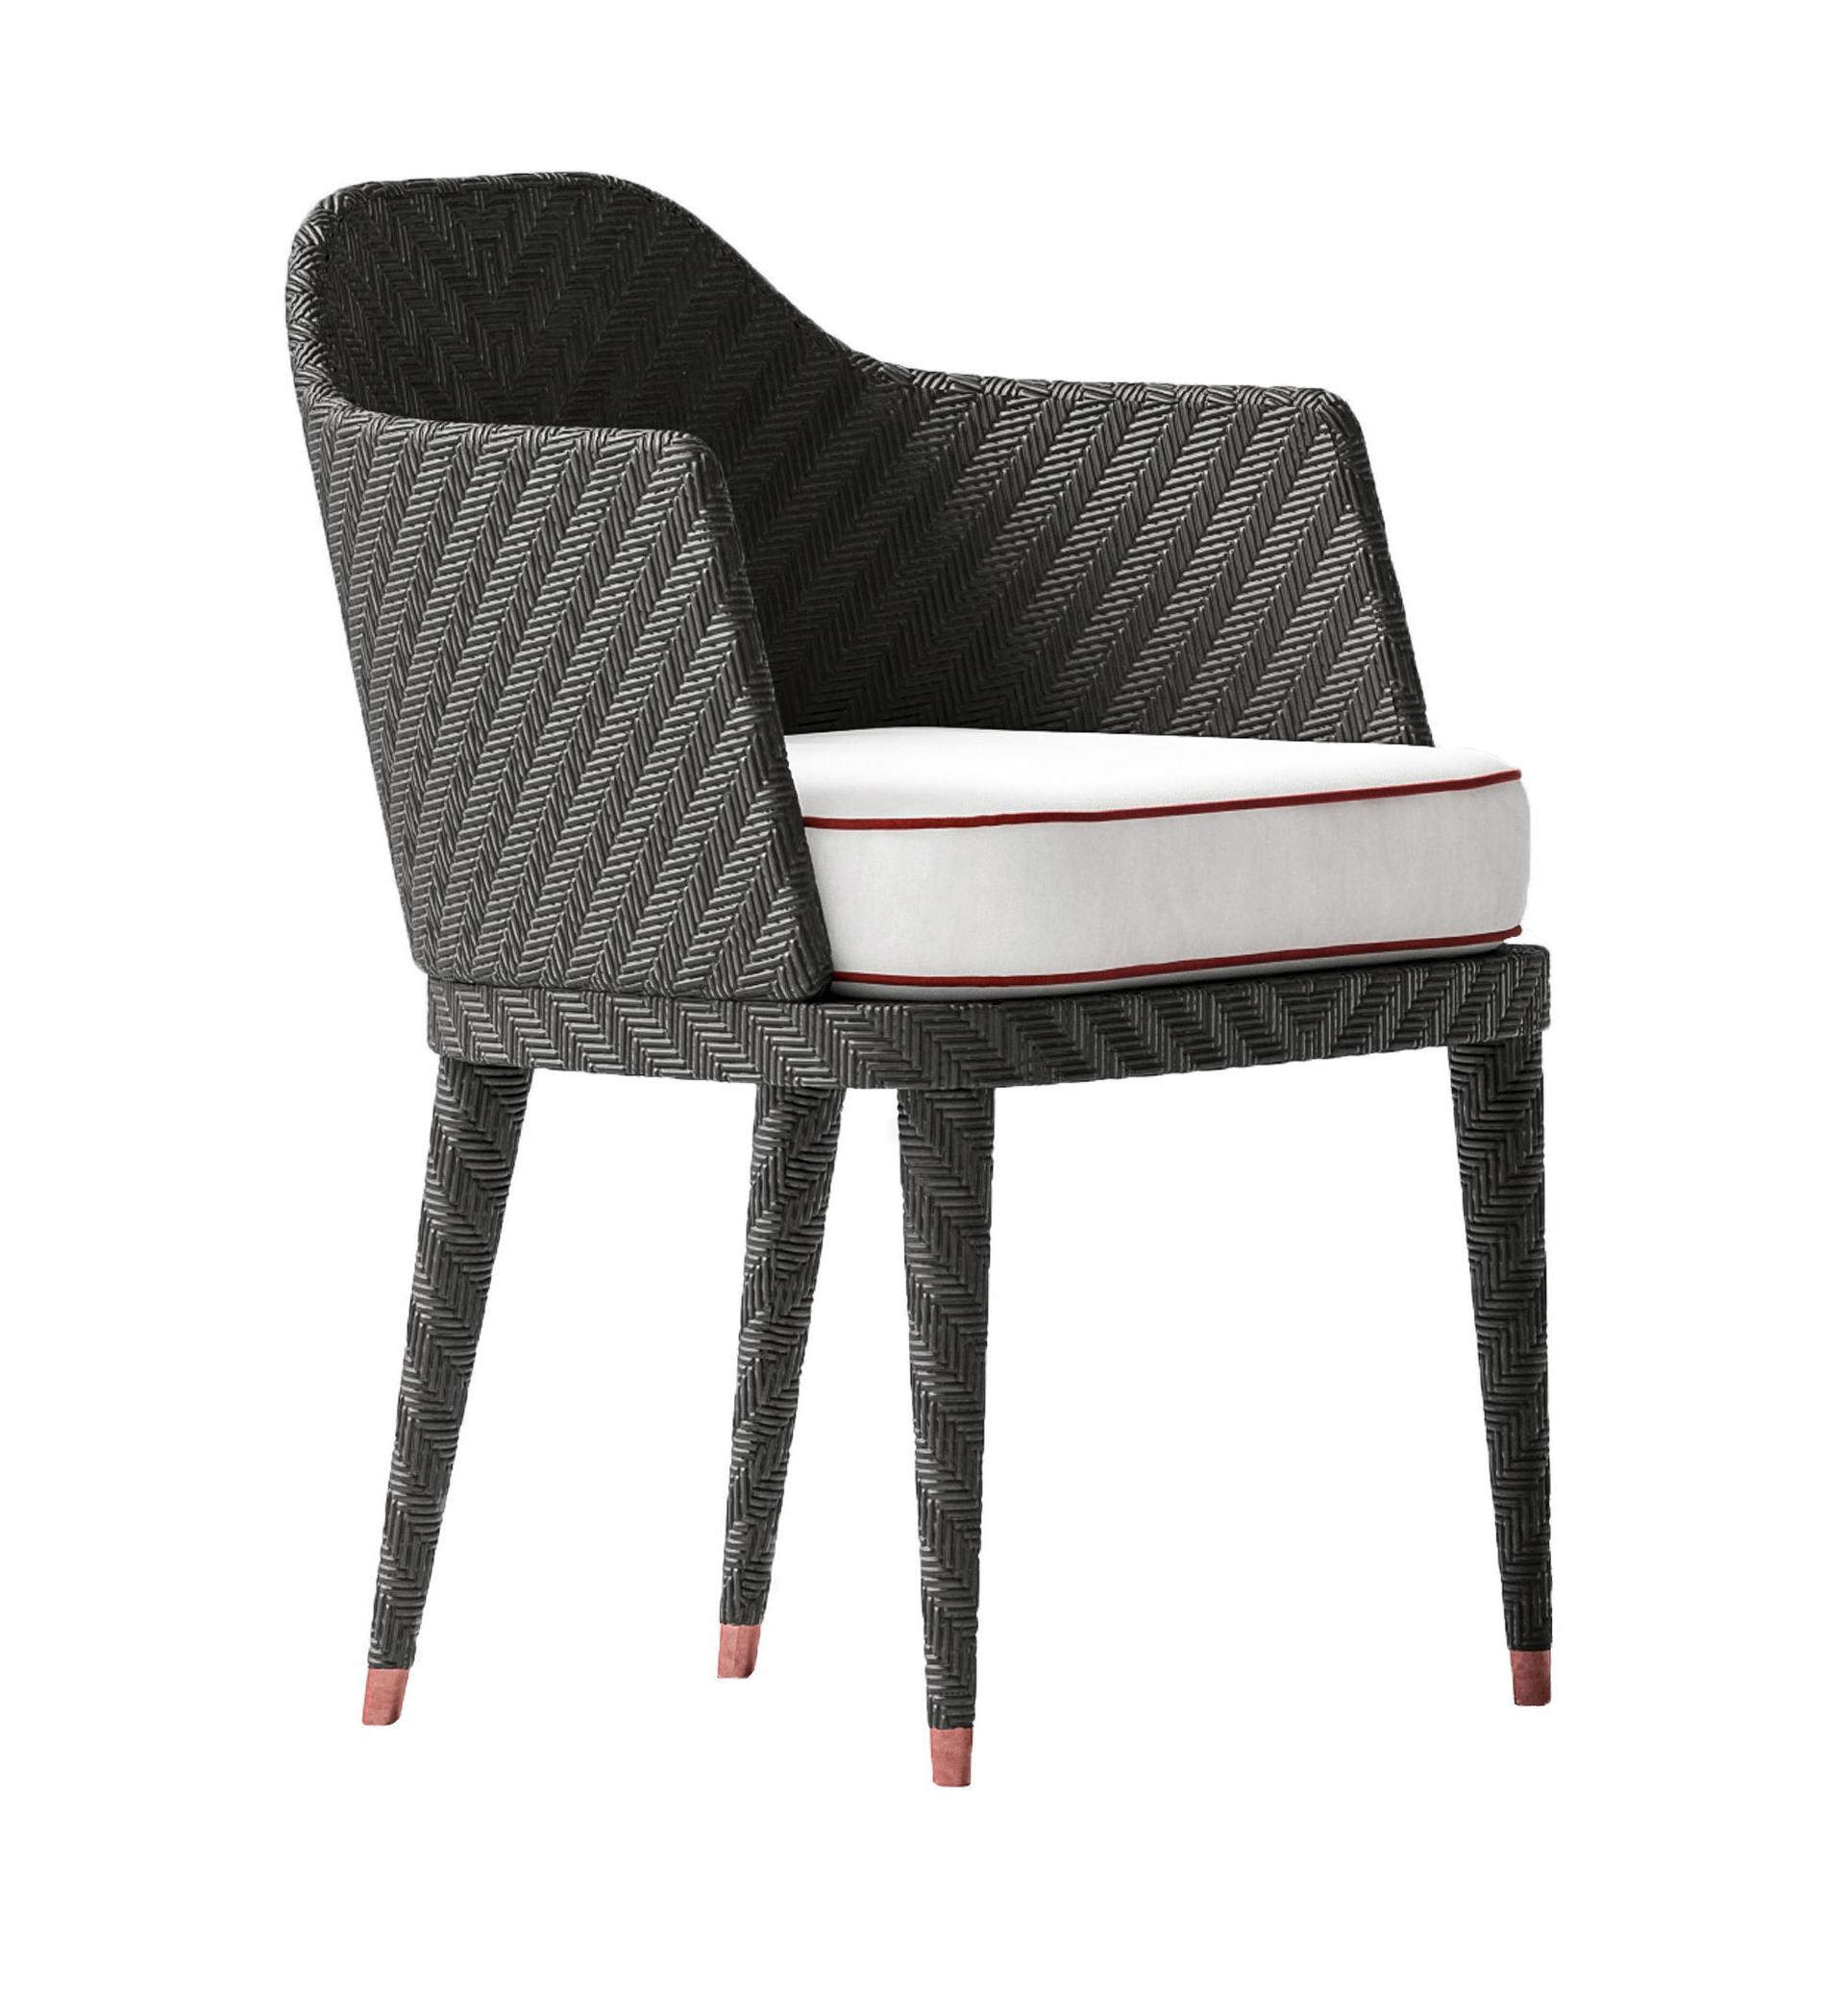 Outdoor Chair With Armrests